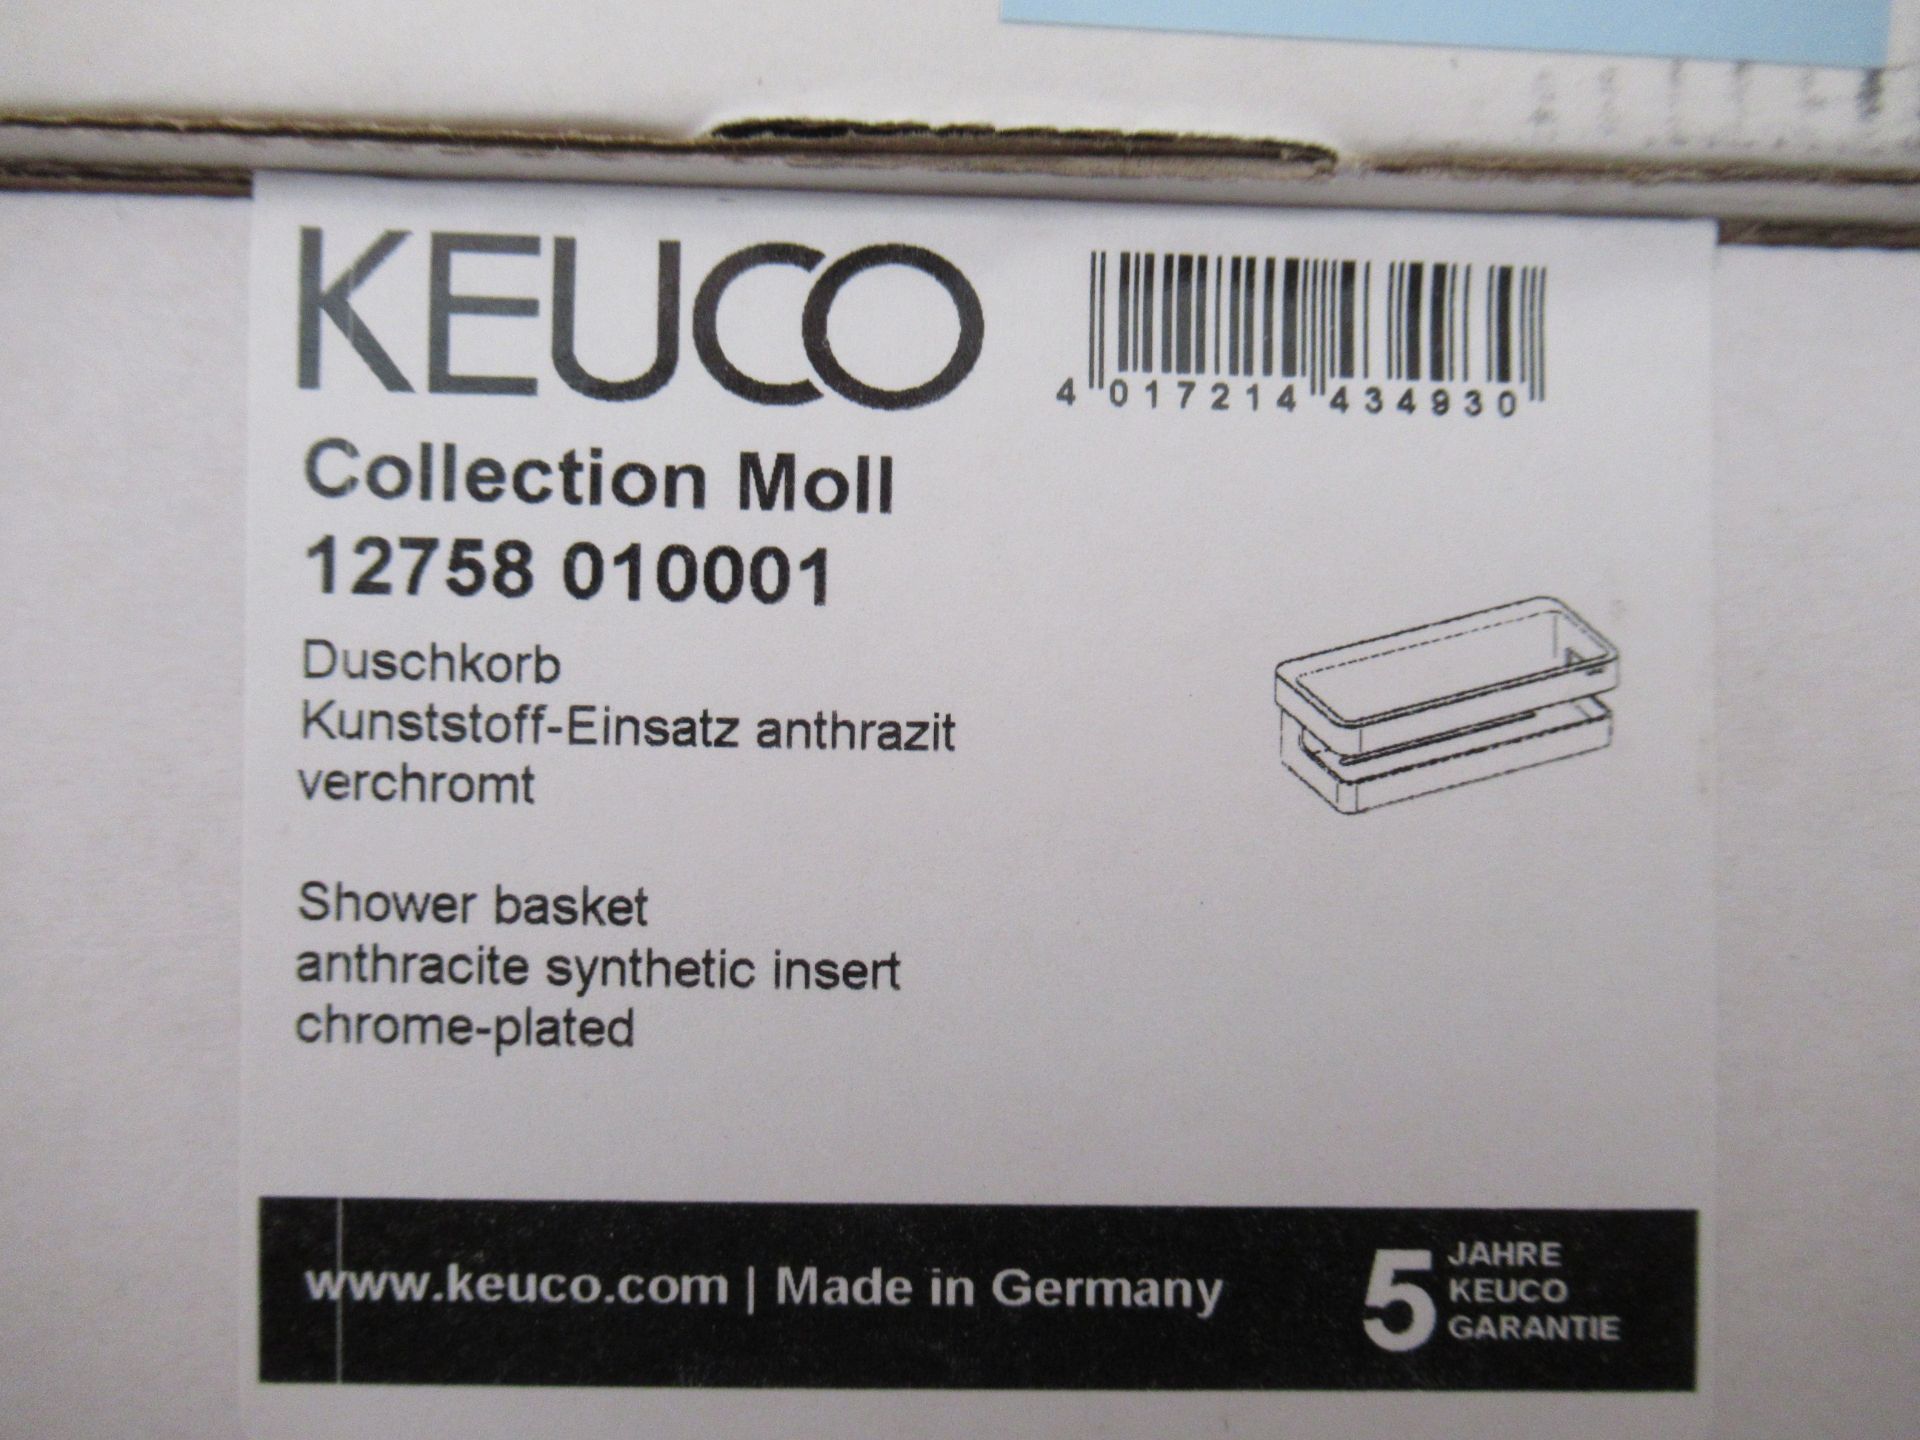 2 x Keuco Collection Moll Shower Basket Chrome Plated, P/N 12758 -010001